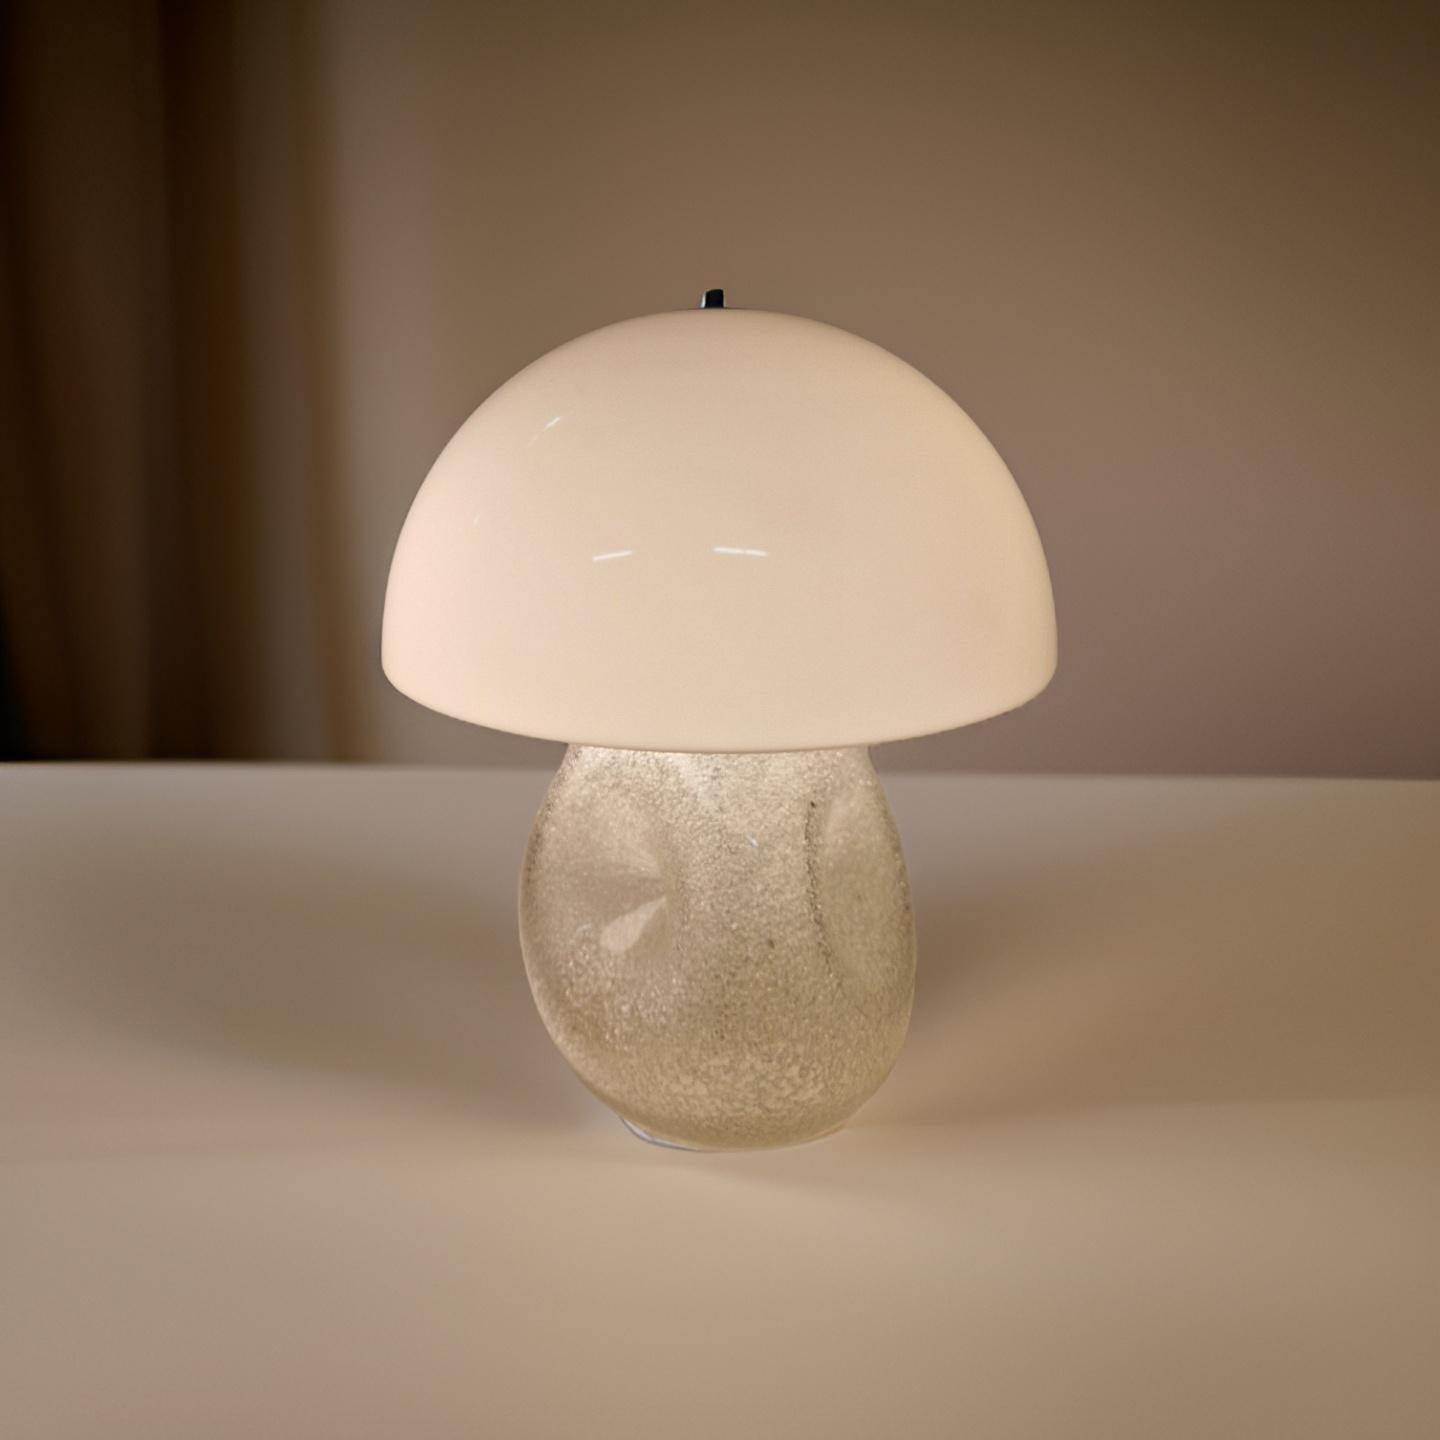 Mid century space age table lamp. The base is made from textured ice glass. It is textured on the inside of the base which shines through the glass giving it a textured outside appearance. It has three plugs that hold standard e27 bulbs. The